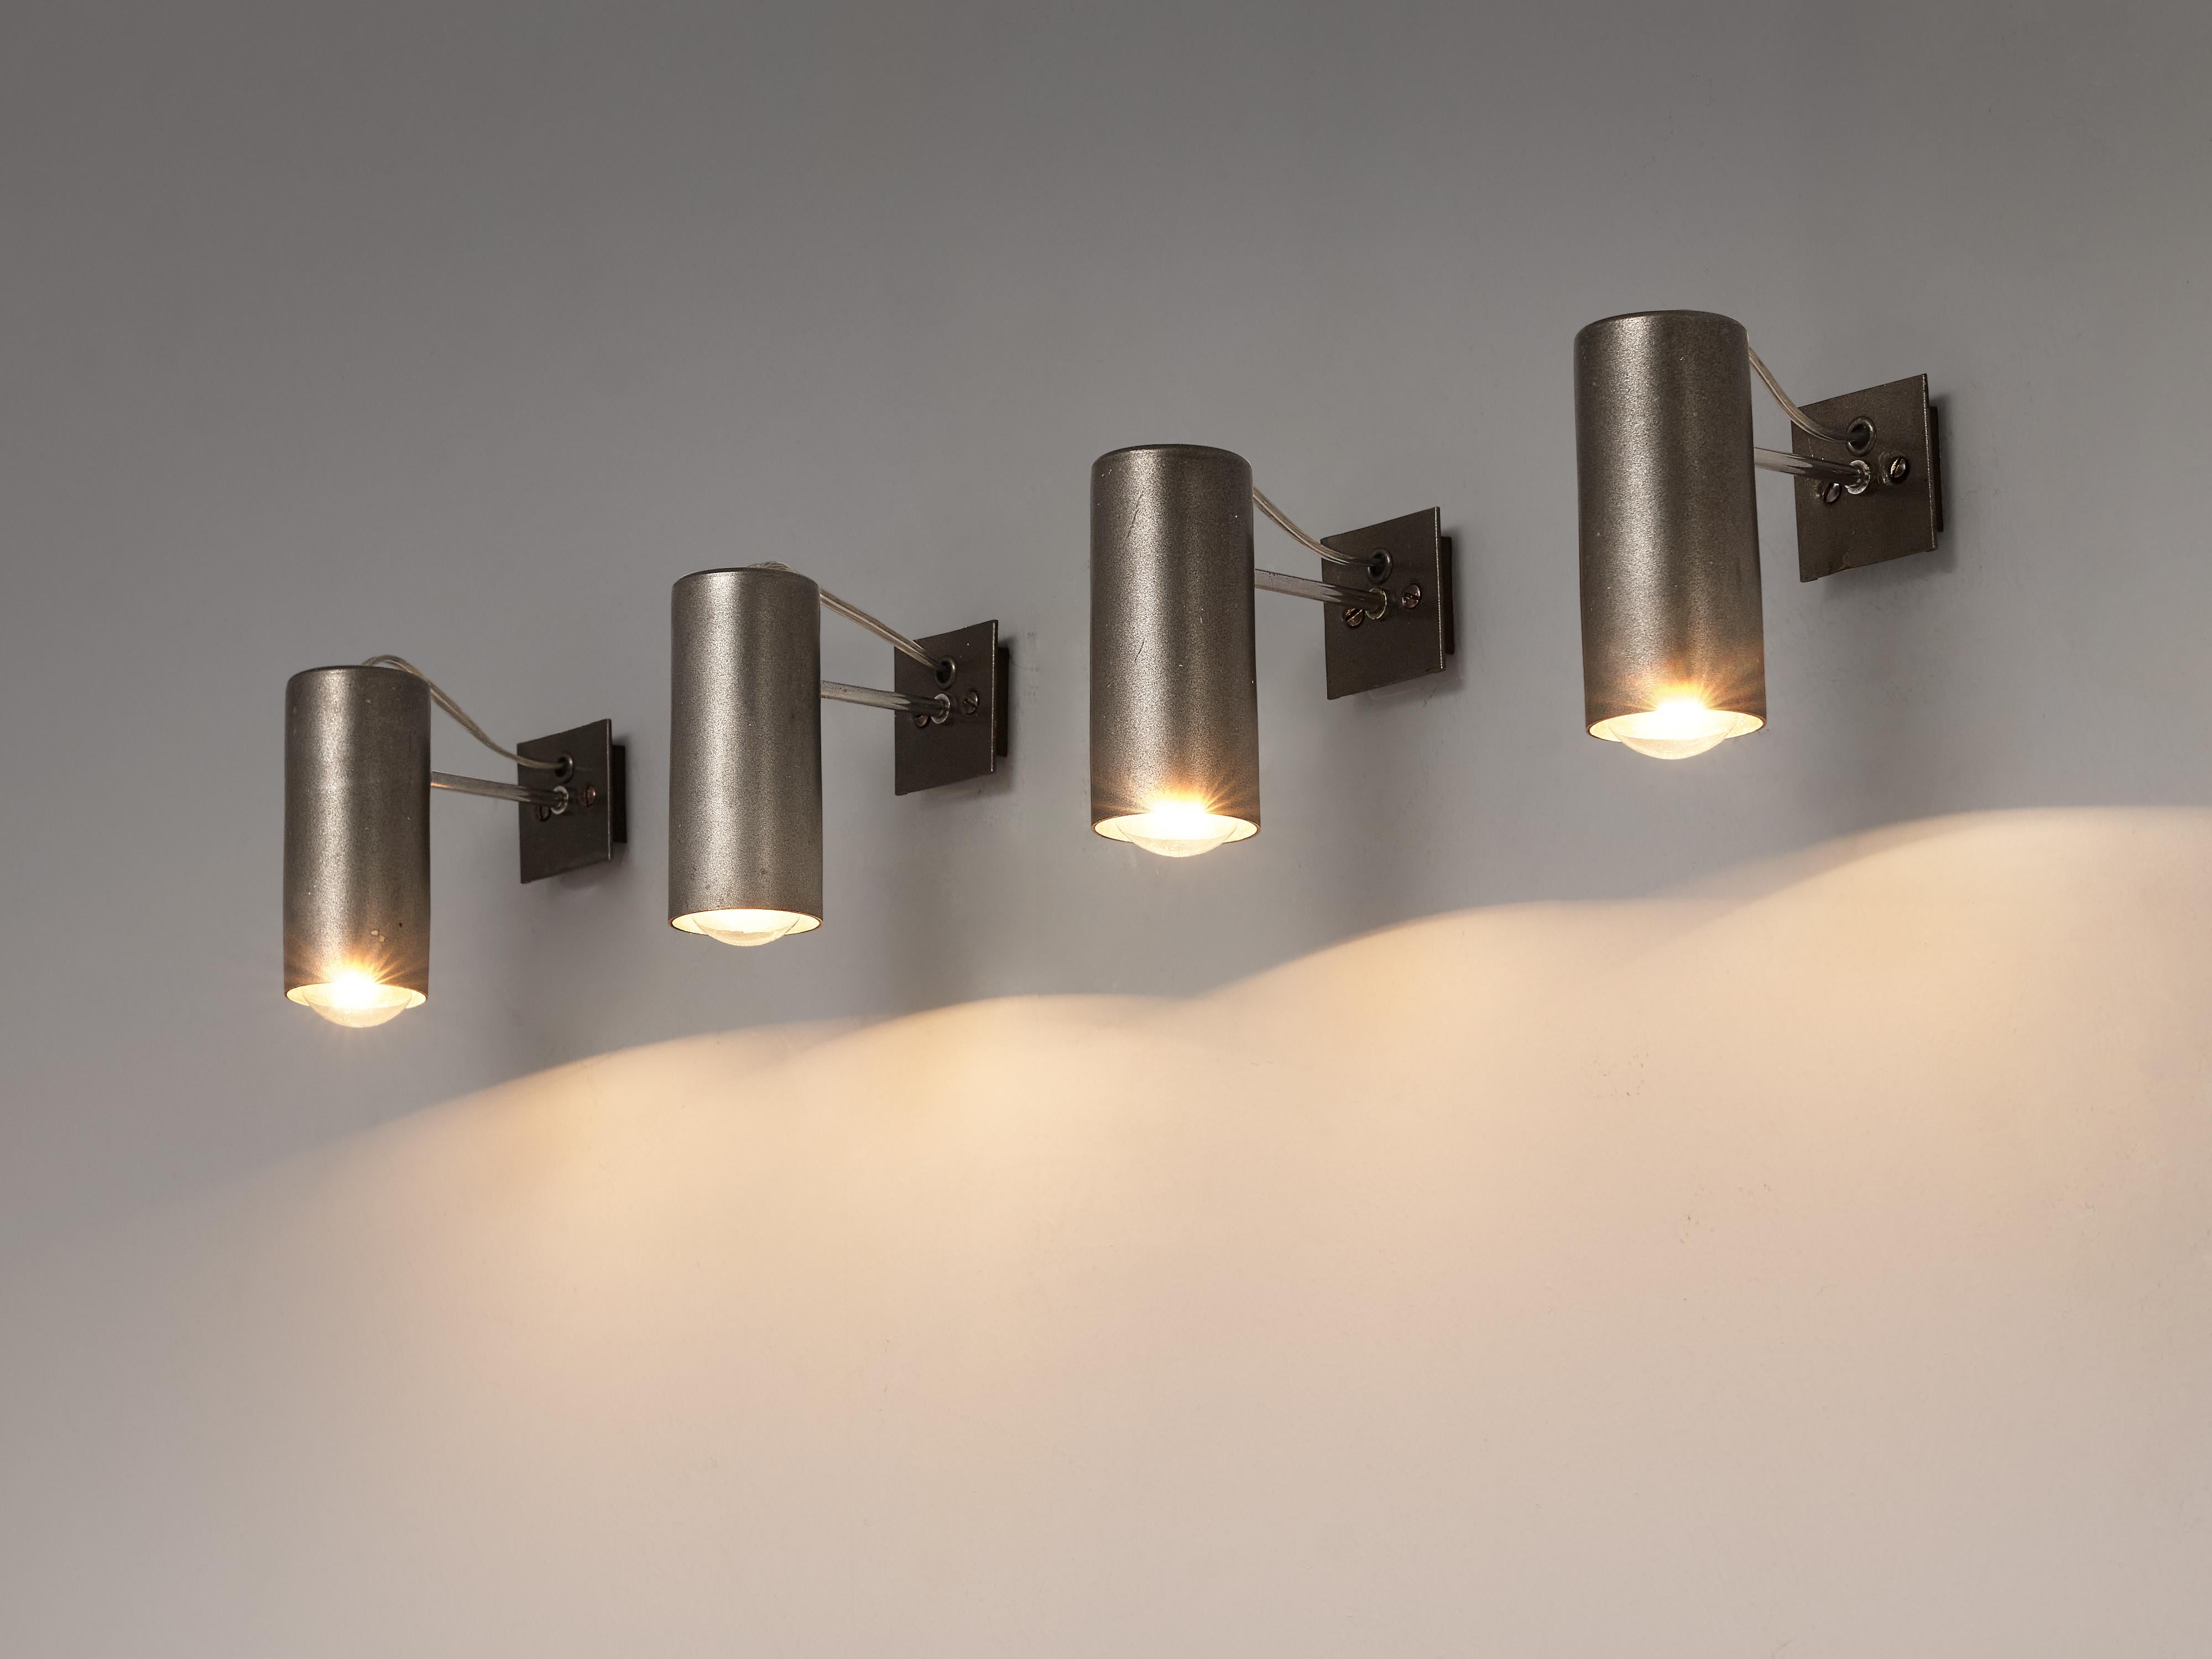 Gino Sarfatti for Arteluce, wall lights, model 36, metal, Italy, 1957. 

Set of wall lights designed by Gino Sarfatti for Arteluce. These metal wall lights are formed out of a cylindrical metal shade at which end a light bulb shows. The shades are